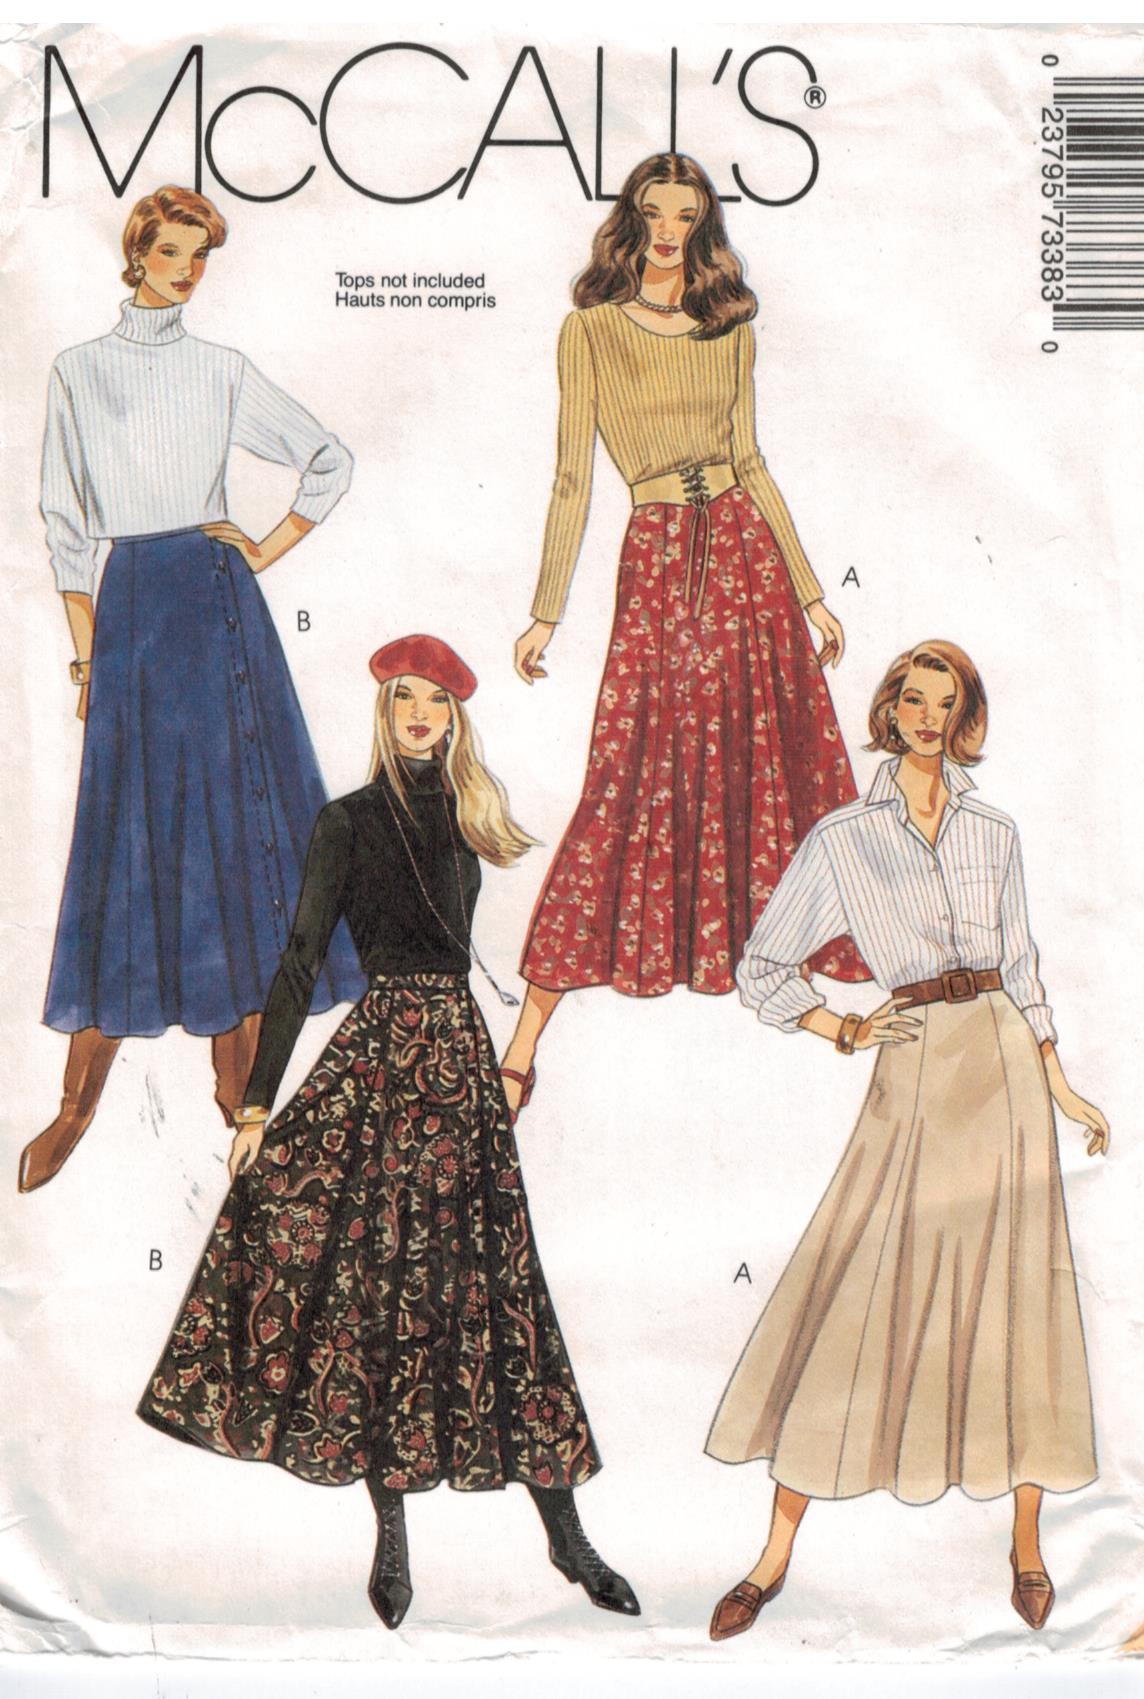 McCalls Pattern 7338 Misses Midi Calf Length A Line Skirts zip back or  button front closing sizes 10, 12, 14